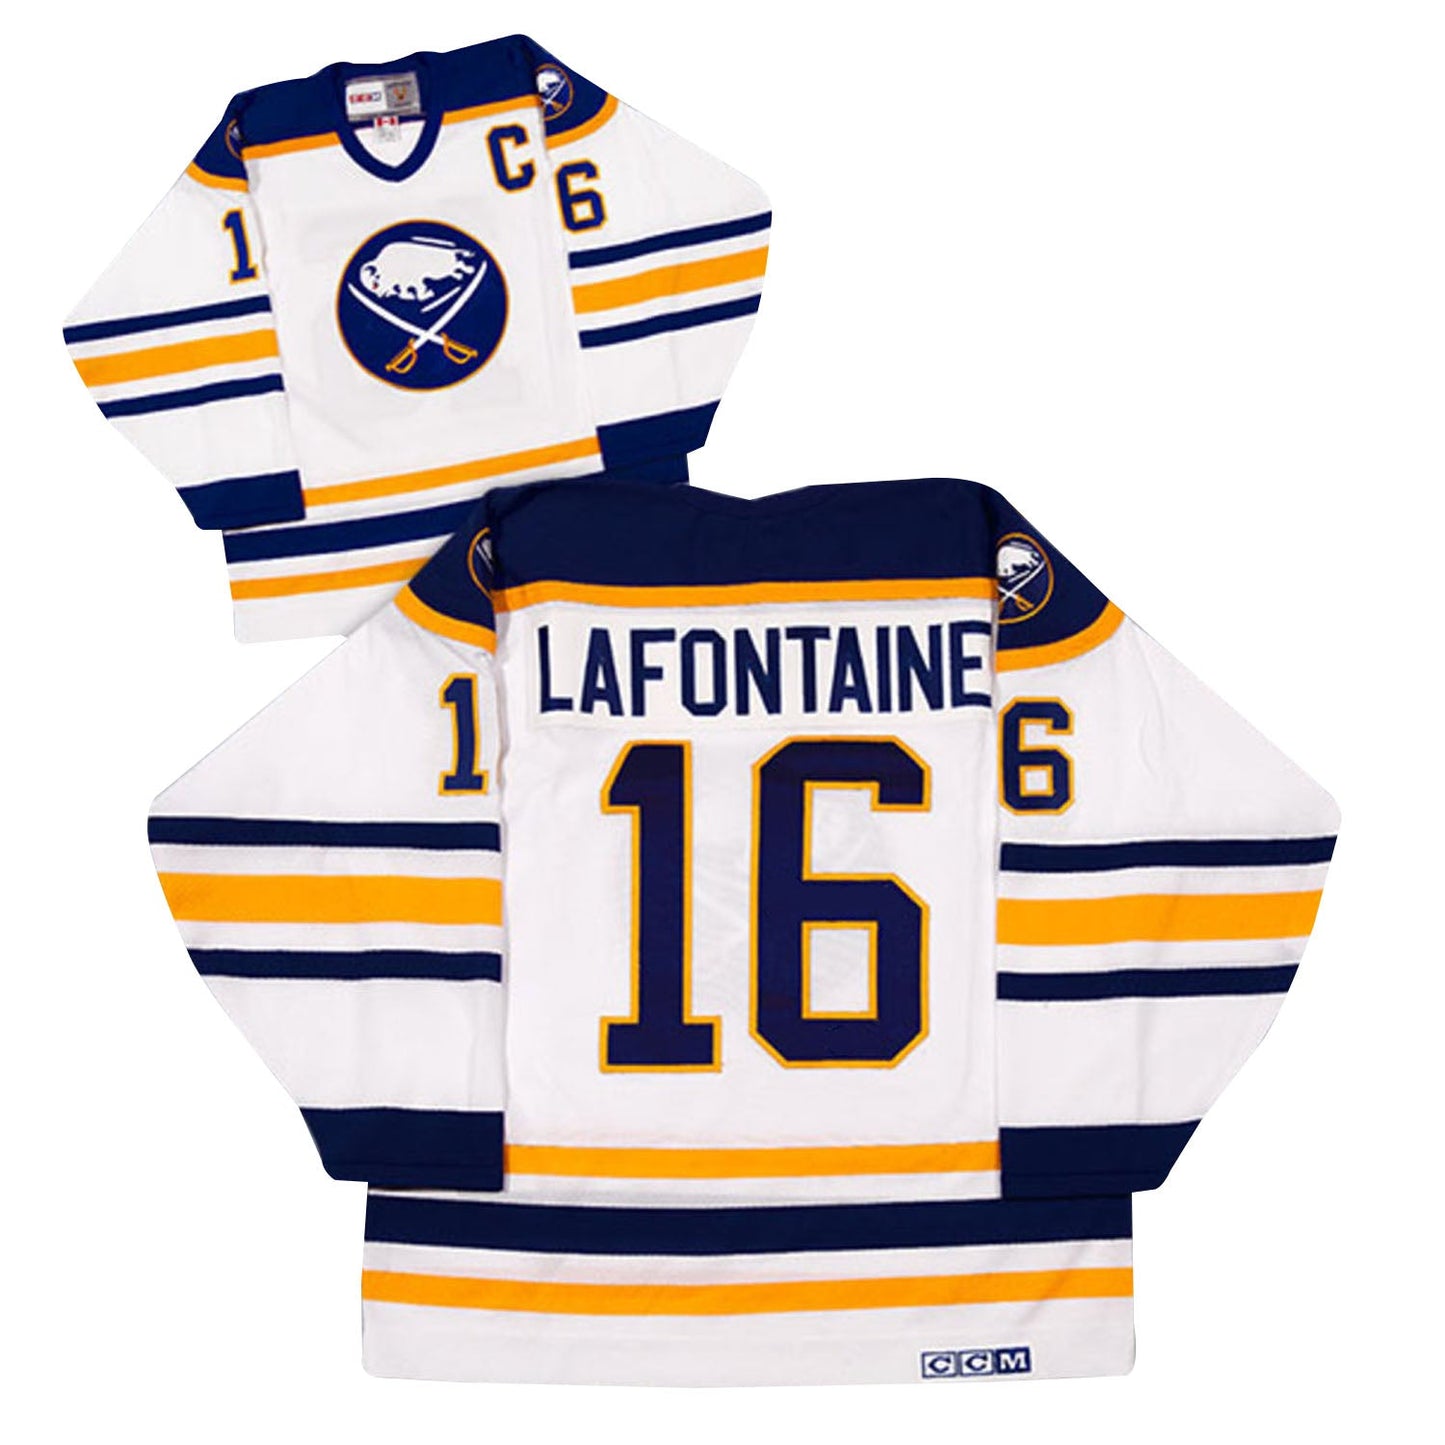 NHL Pat Lafontaine Buffalo Sabres 16 Jersey